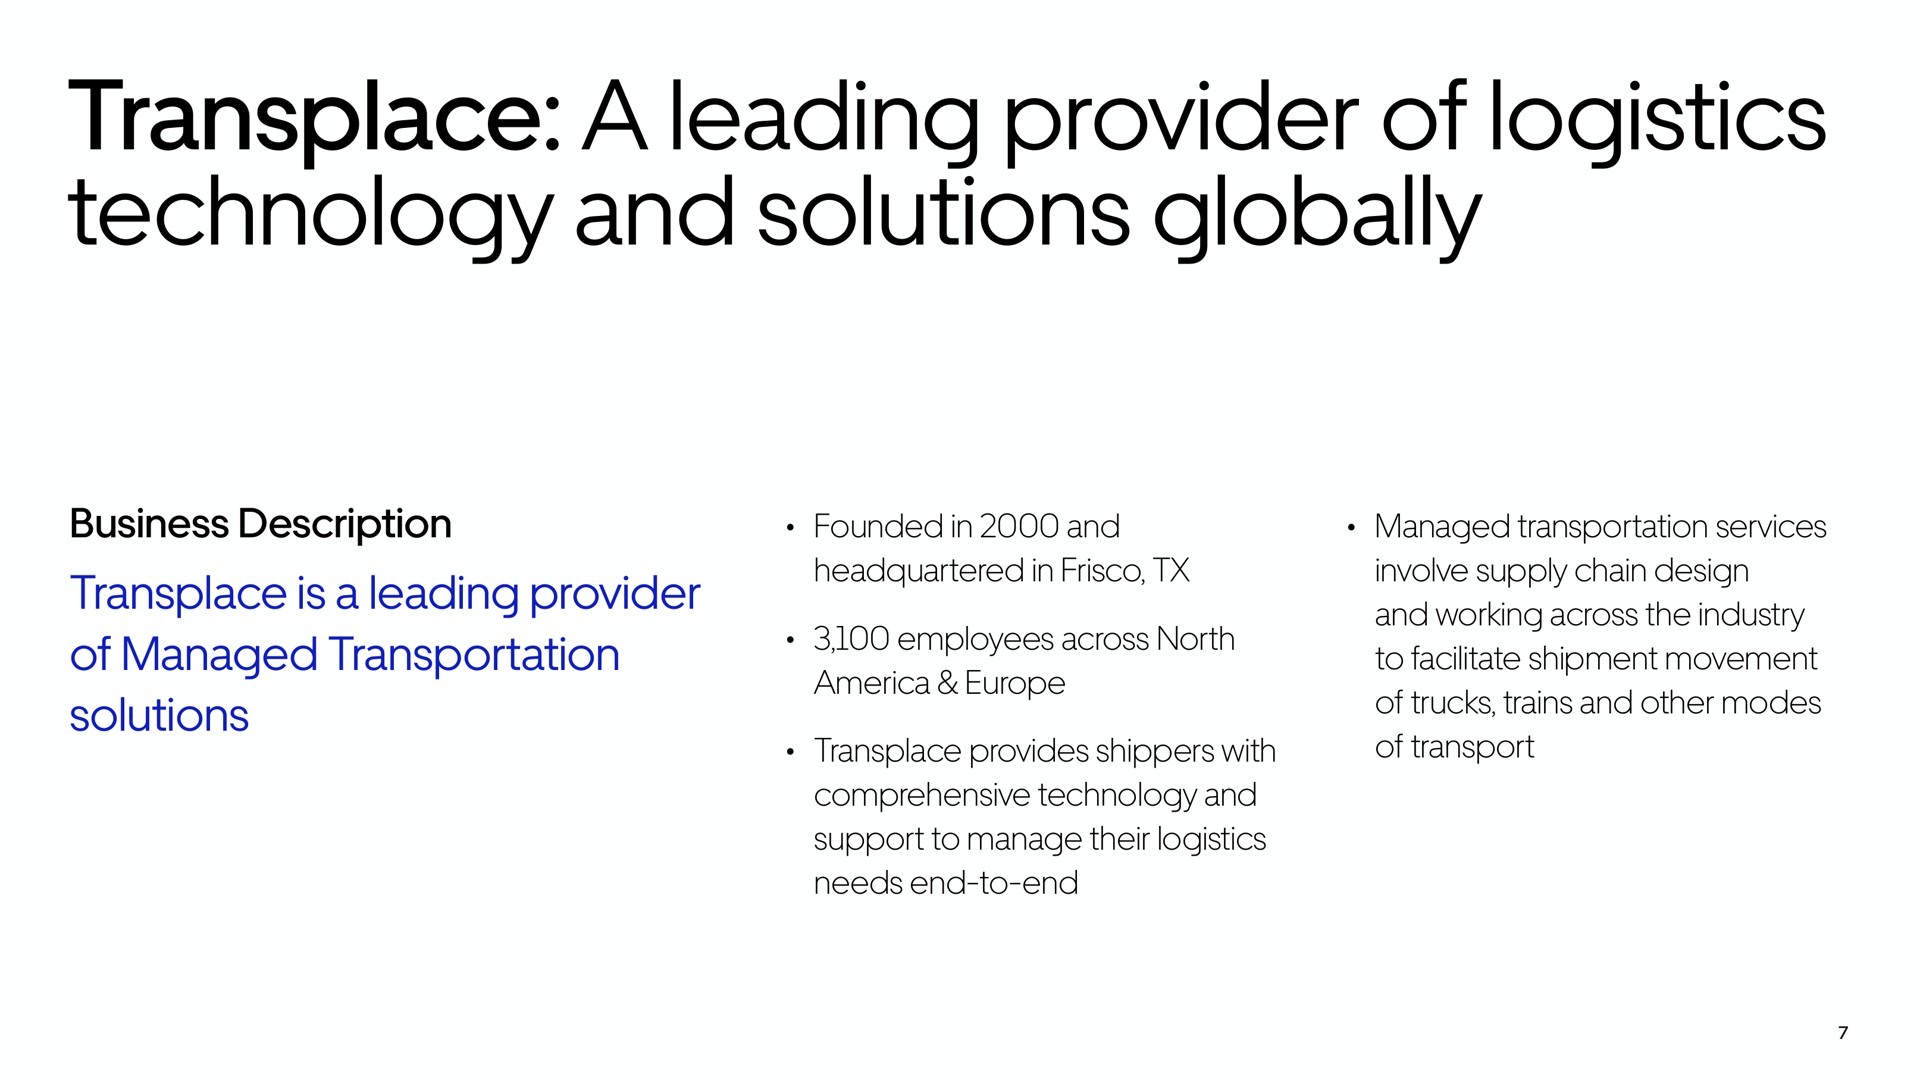 transplace a leading provider of logistics technology and solutions globally | Uber